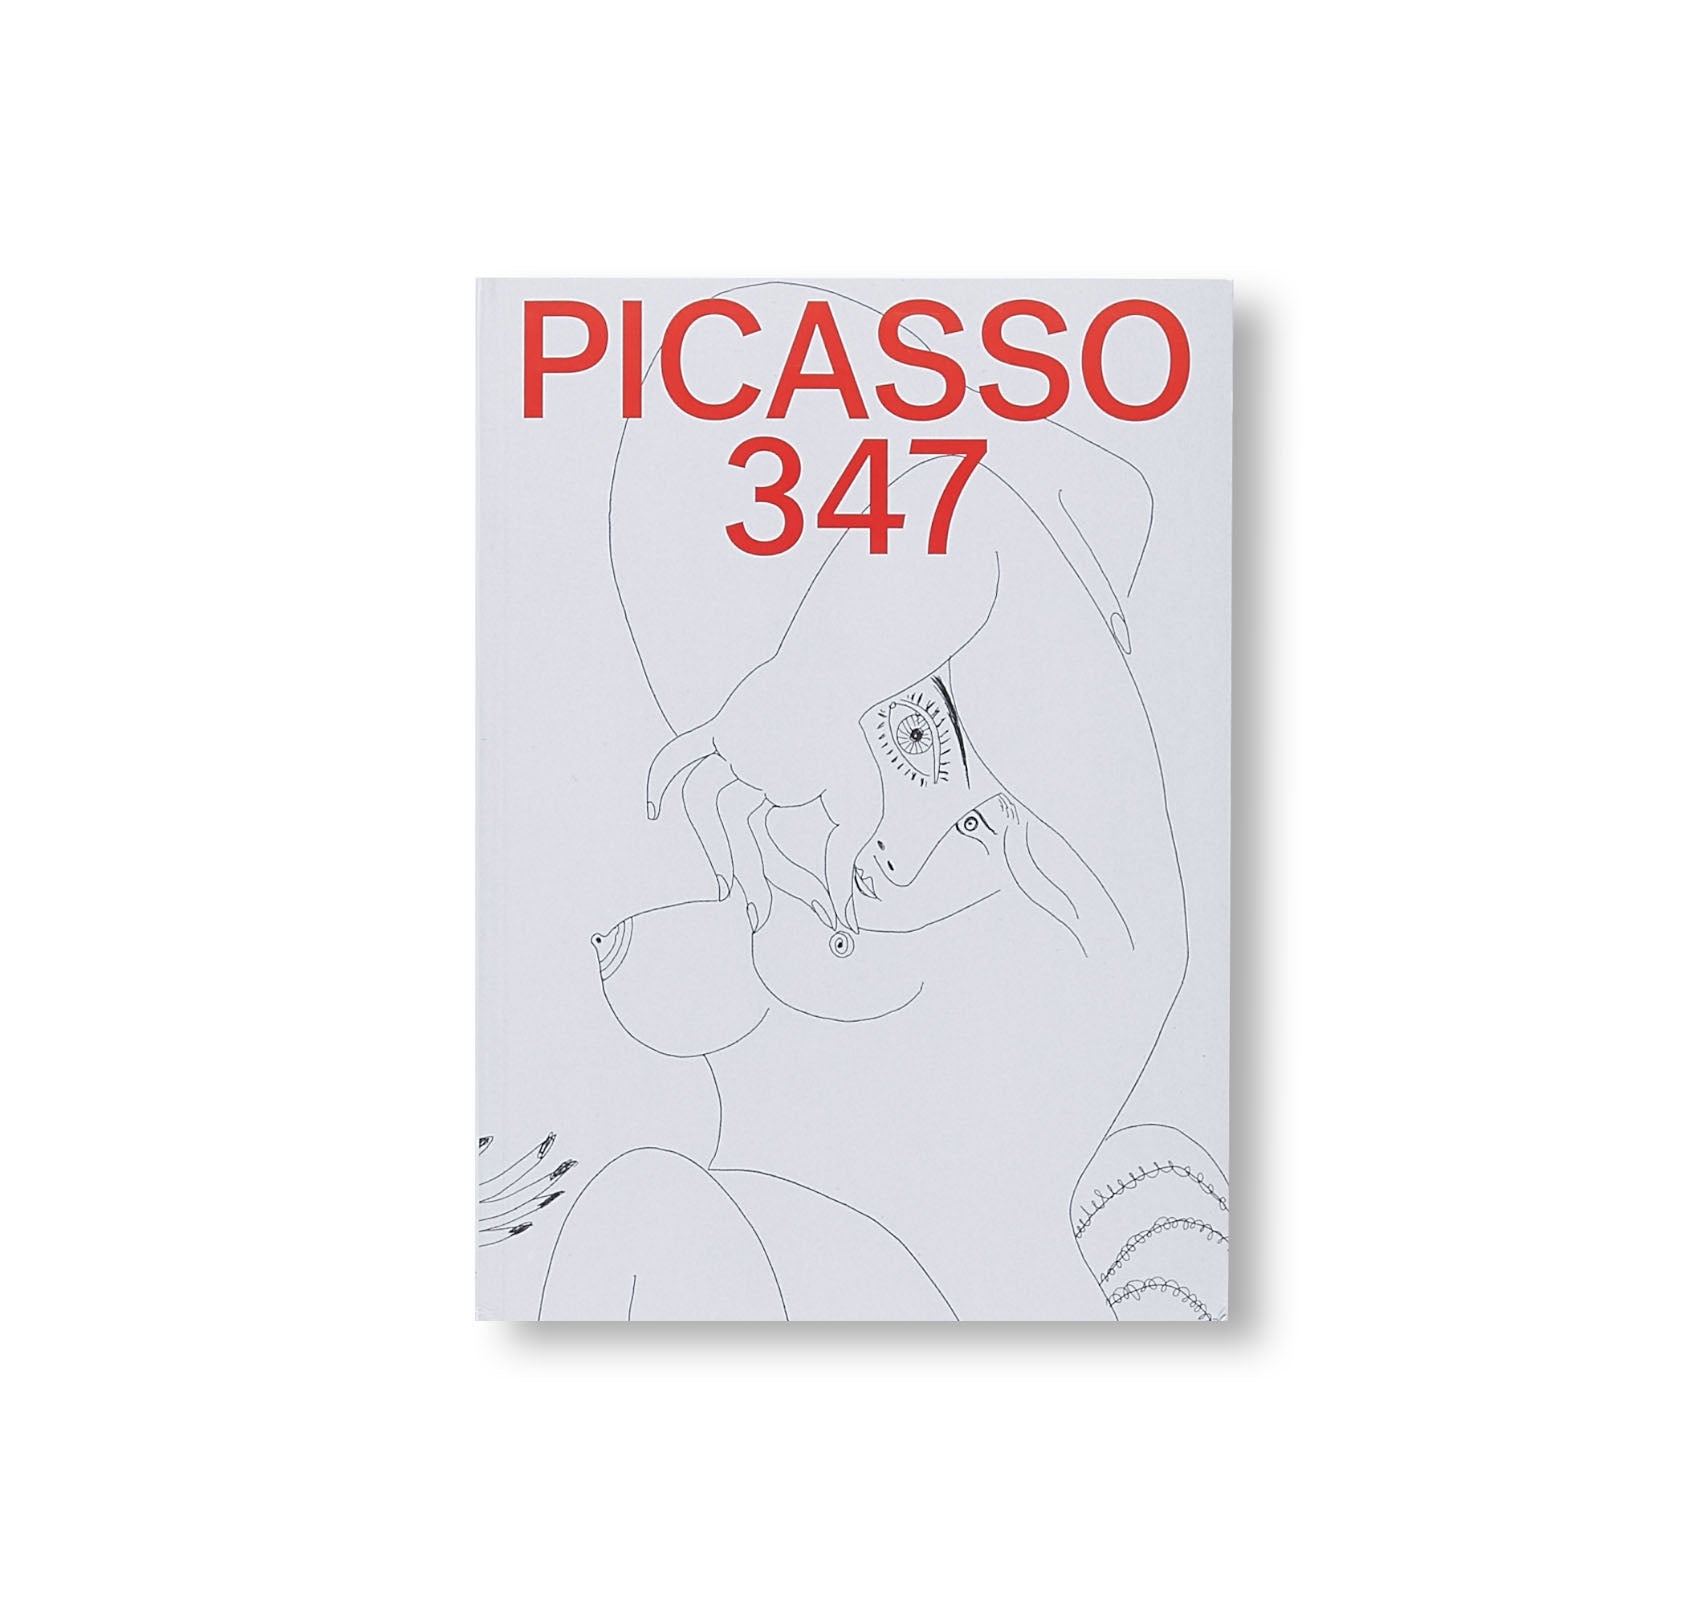 PICASSO 347 by Pablo Picasso